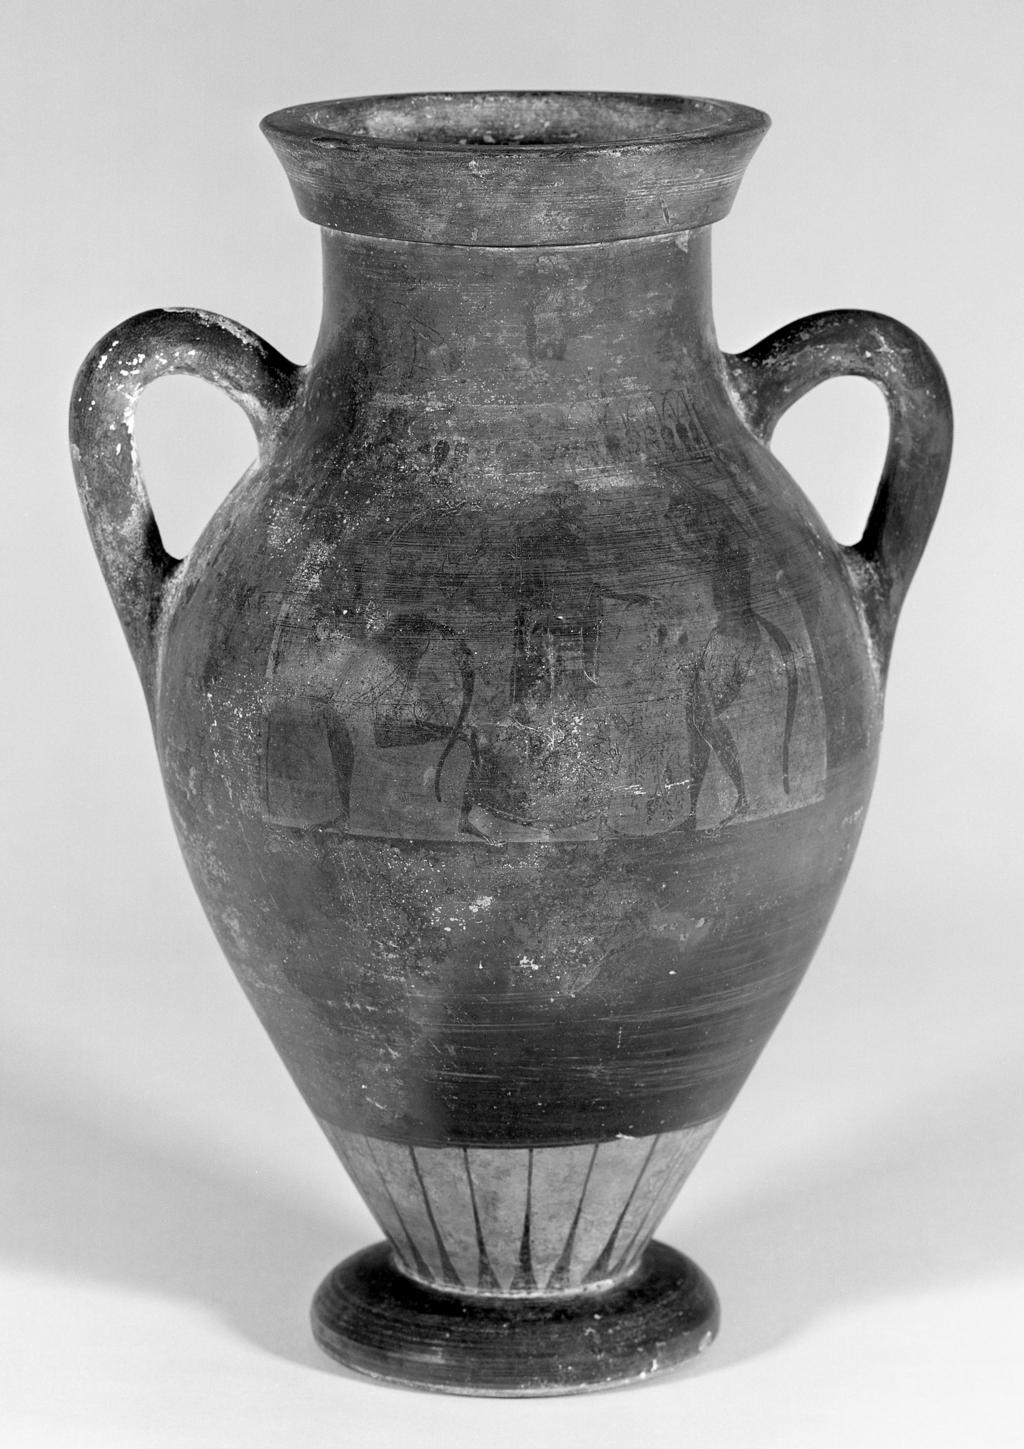 An image of Vessel/Amphora. Chimaera, Dionysos and satyrs. Production: Etruria. Find Spot: Vulci Etruria, Italy. Clay, black-figured, height 0.405 m, 550- 525 B.C. Archaic Period.